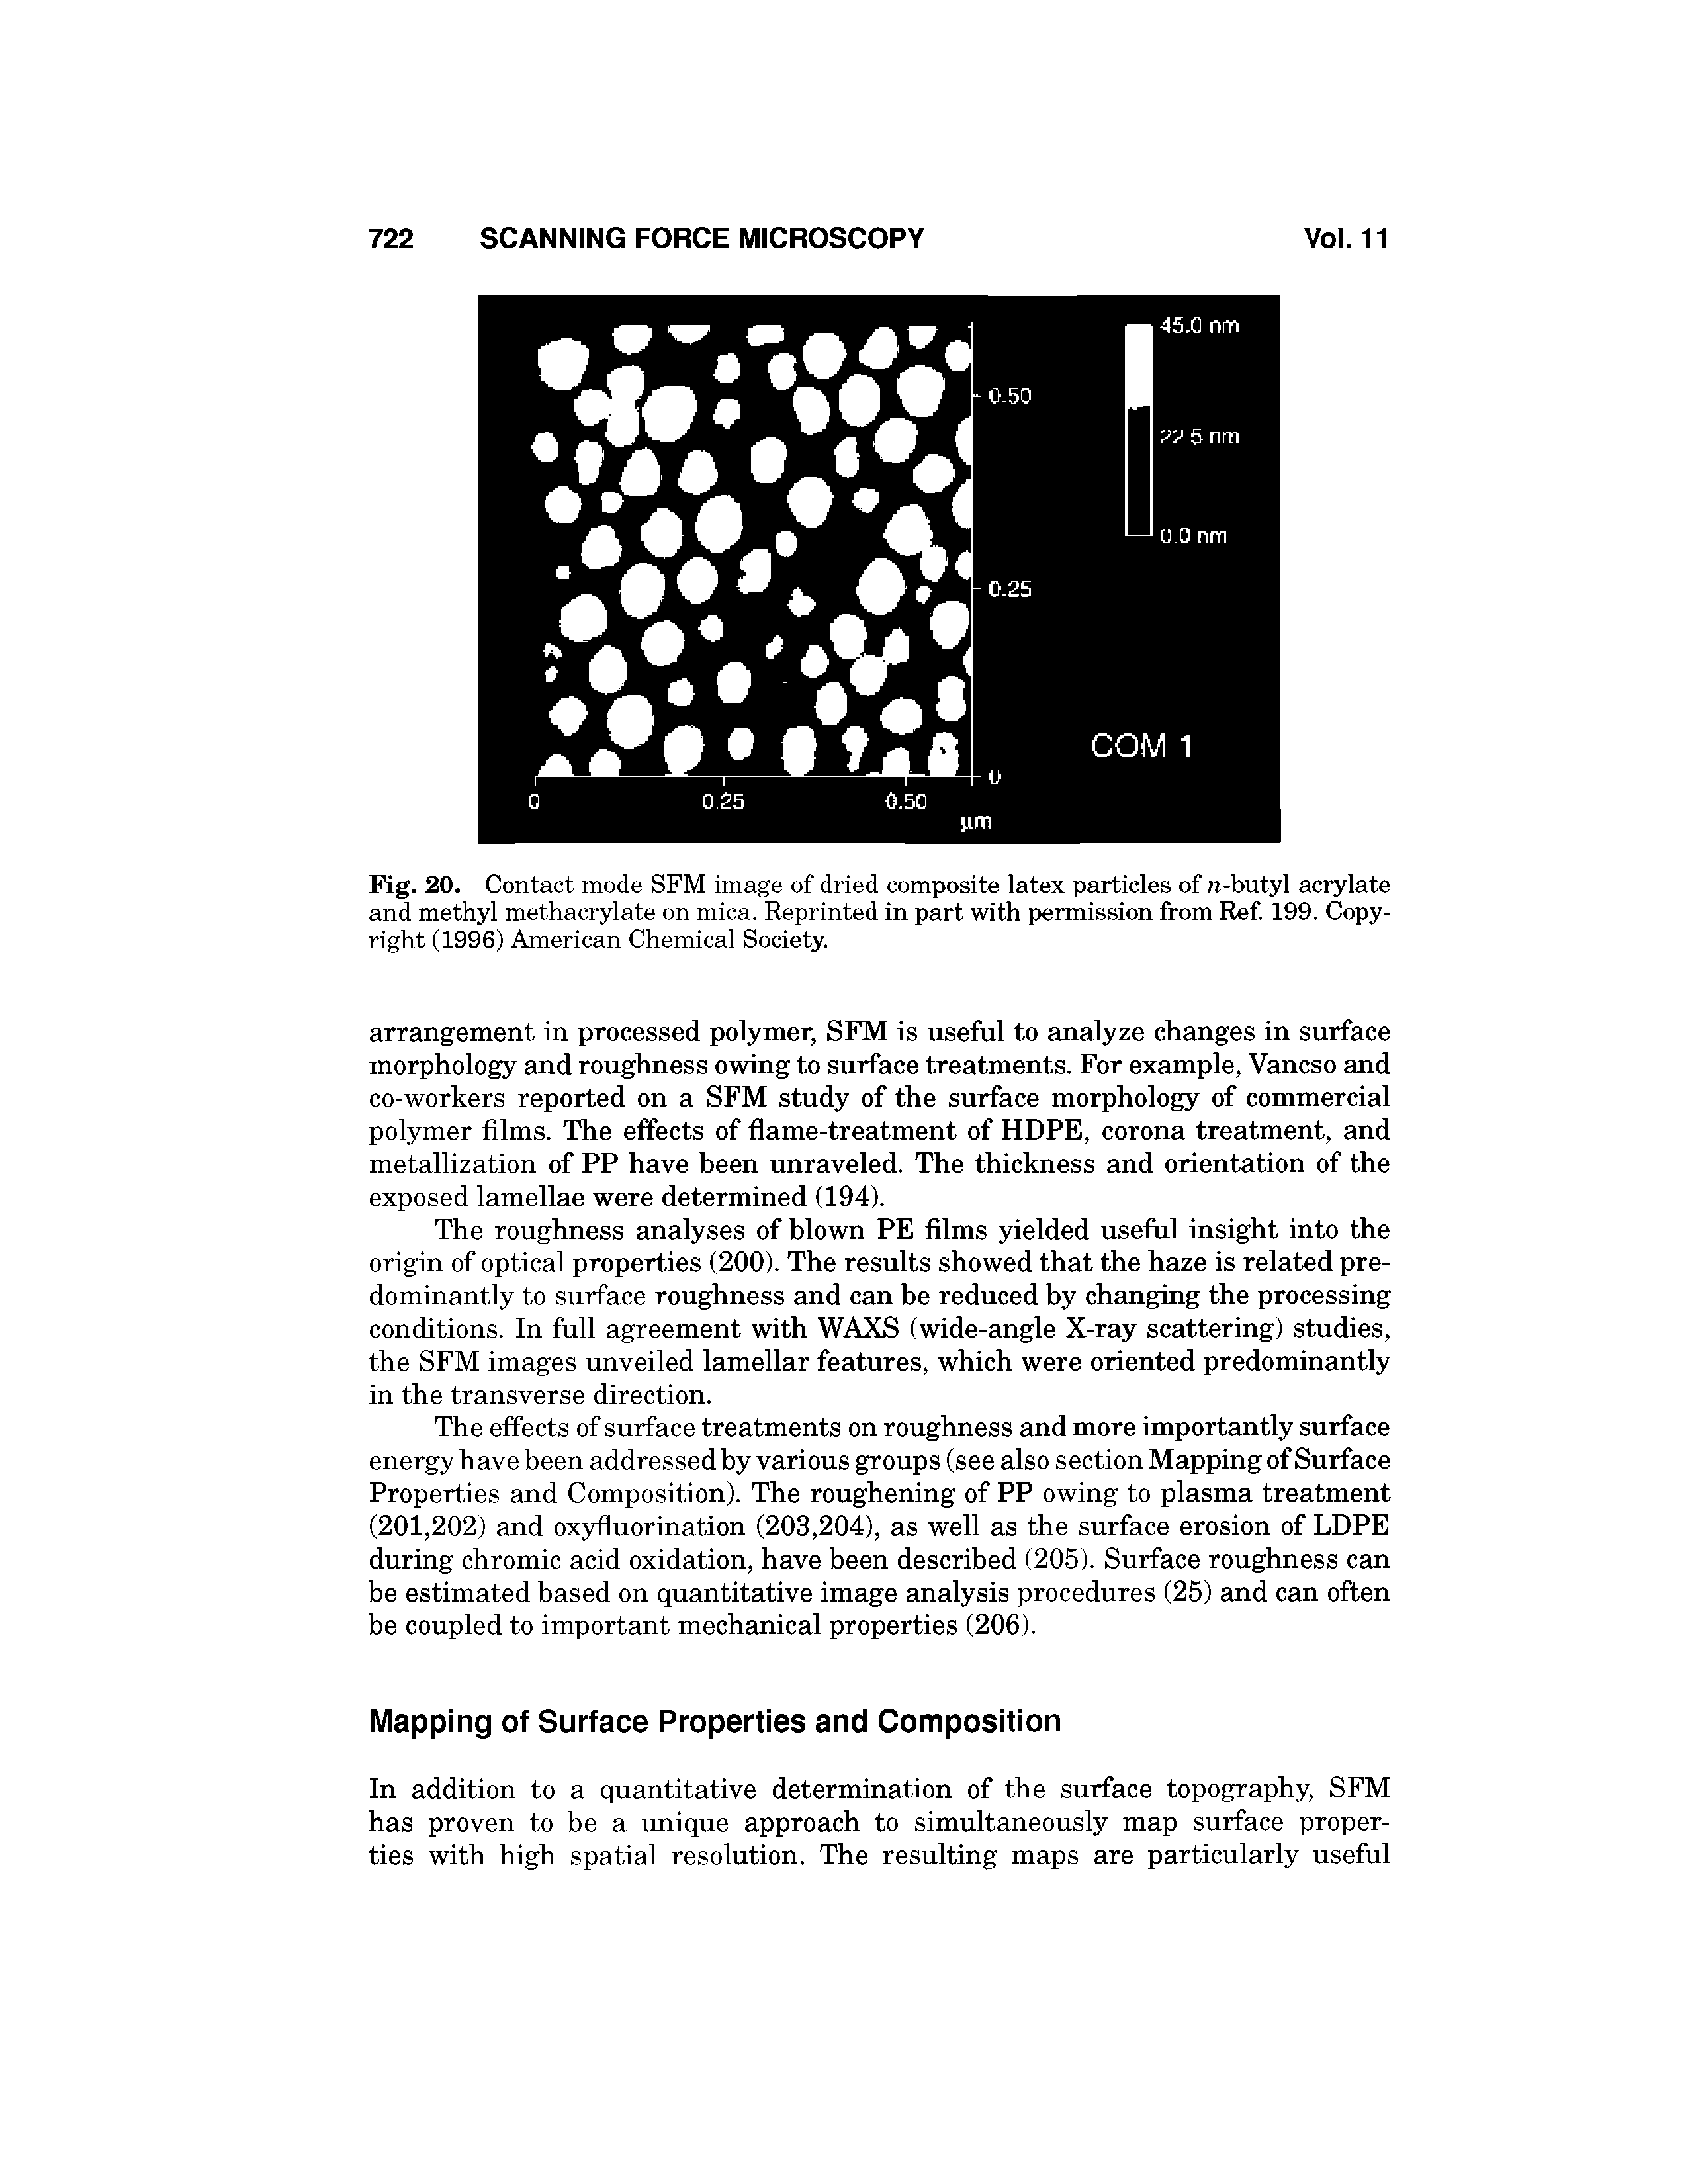 Fig. 20. Contact mode SFM image of dried composite latex particles of w-butyl acrylate and methyl methacrylate on mica. Reprinted in part with permission from Ref. 199. Copyright (1996) American Chemical Society.